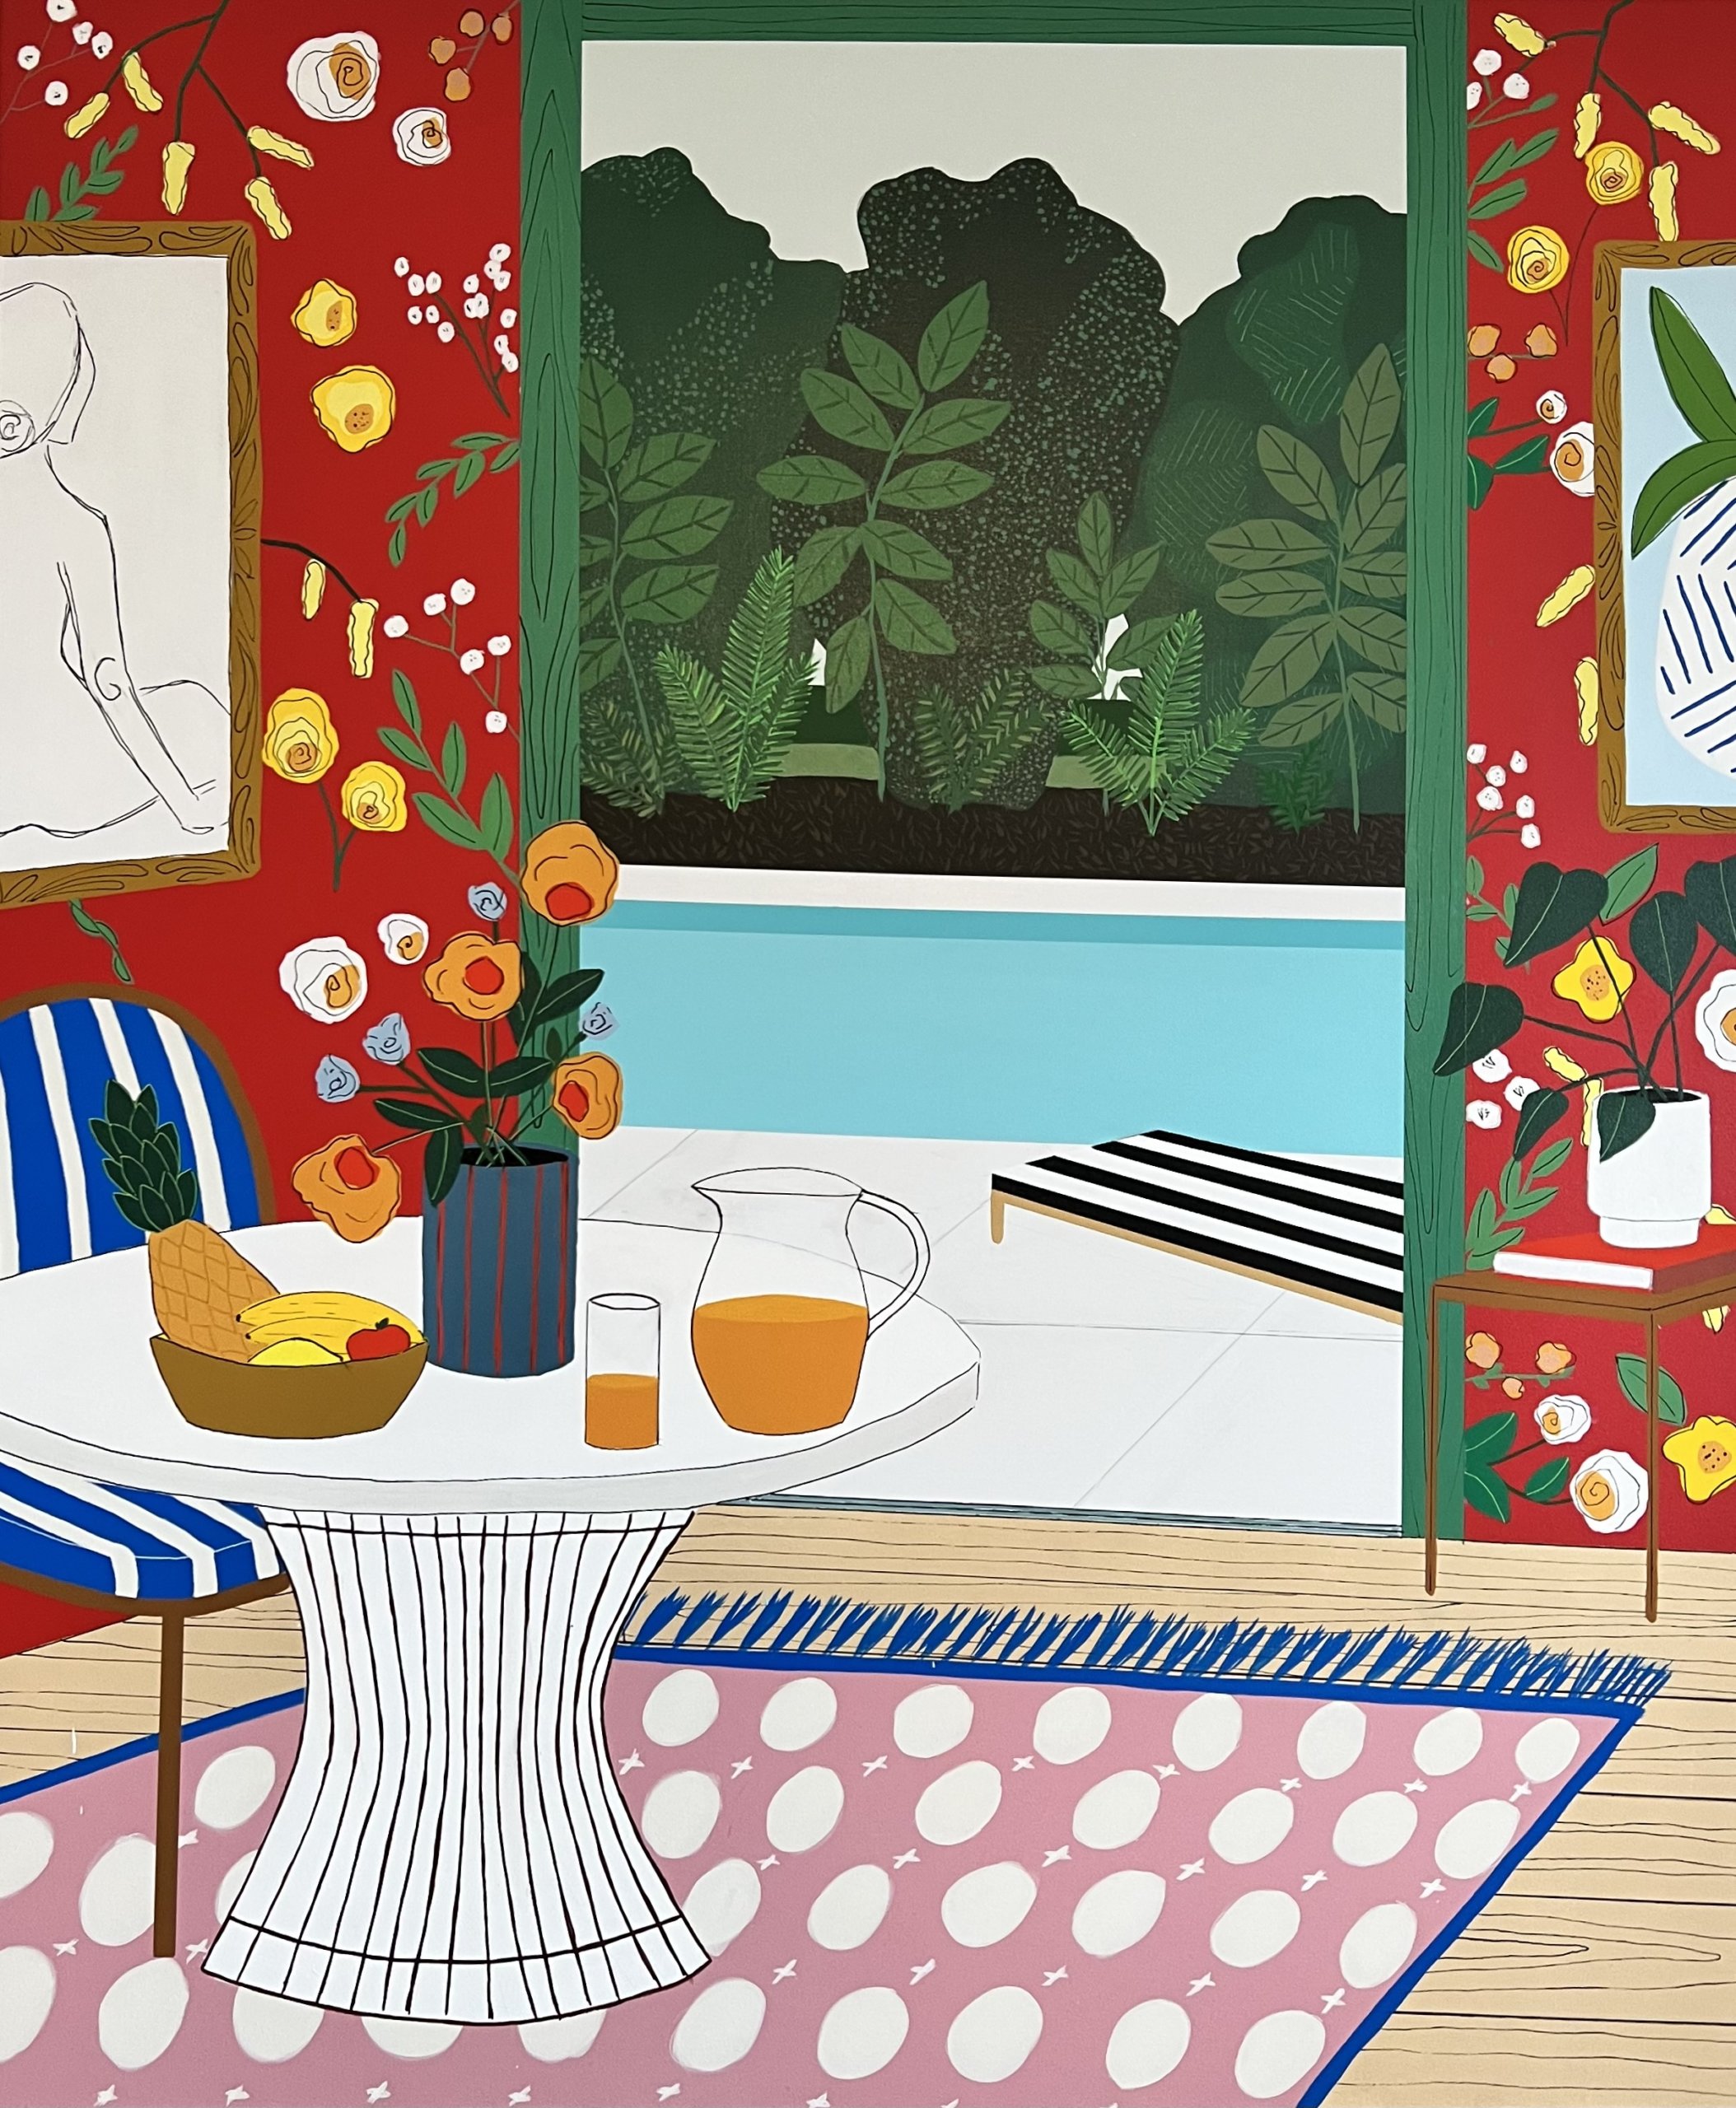 Amy Penner's "Meet Me by the Pool (I brought flowers)" (acrylic on canvas, 48" x 40") at Ric Michel Fine Art